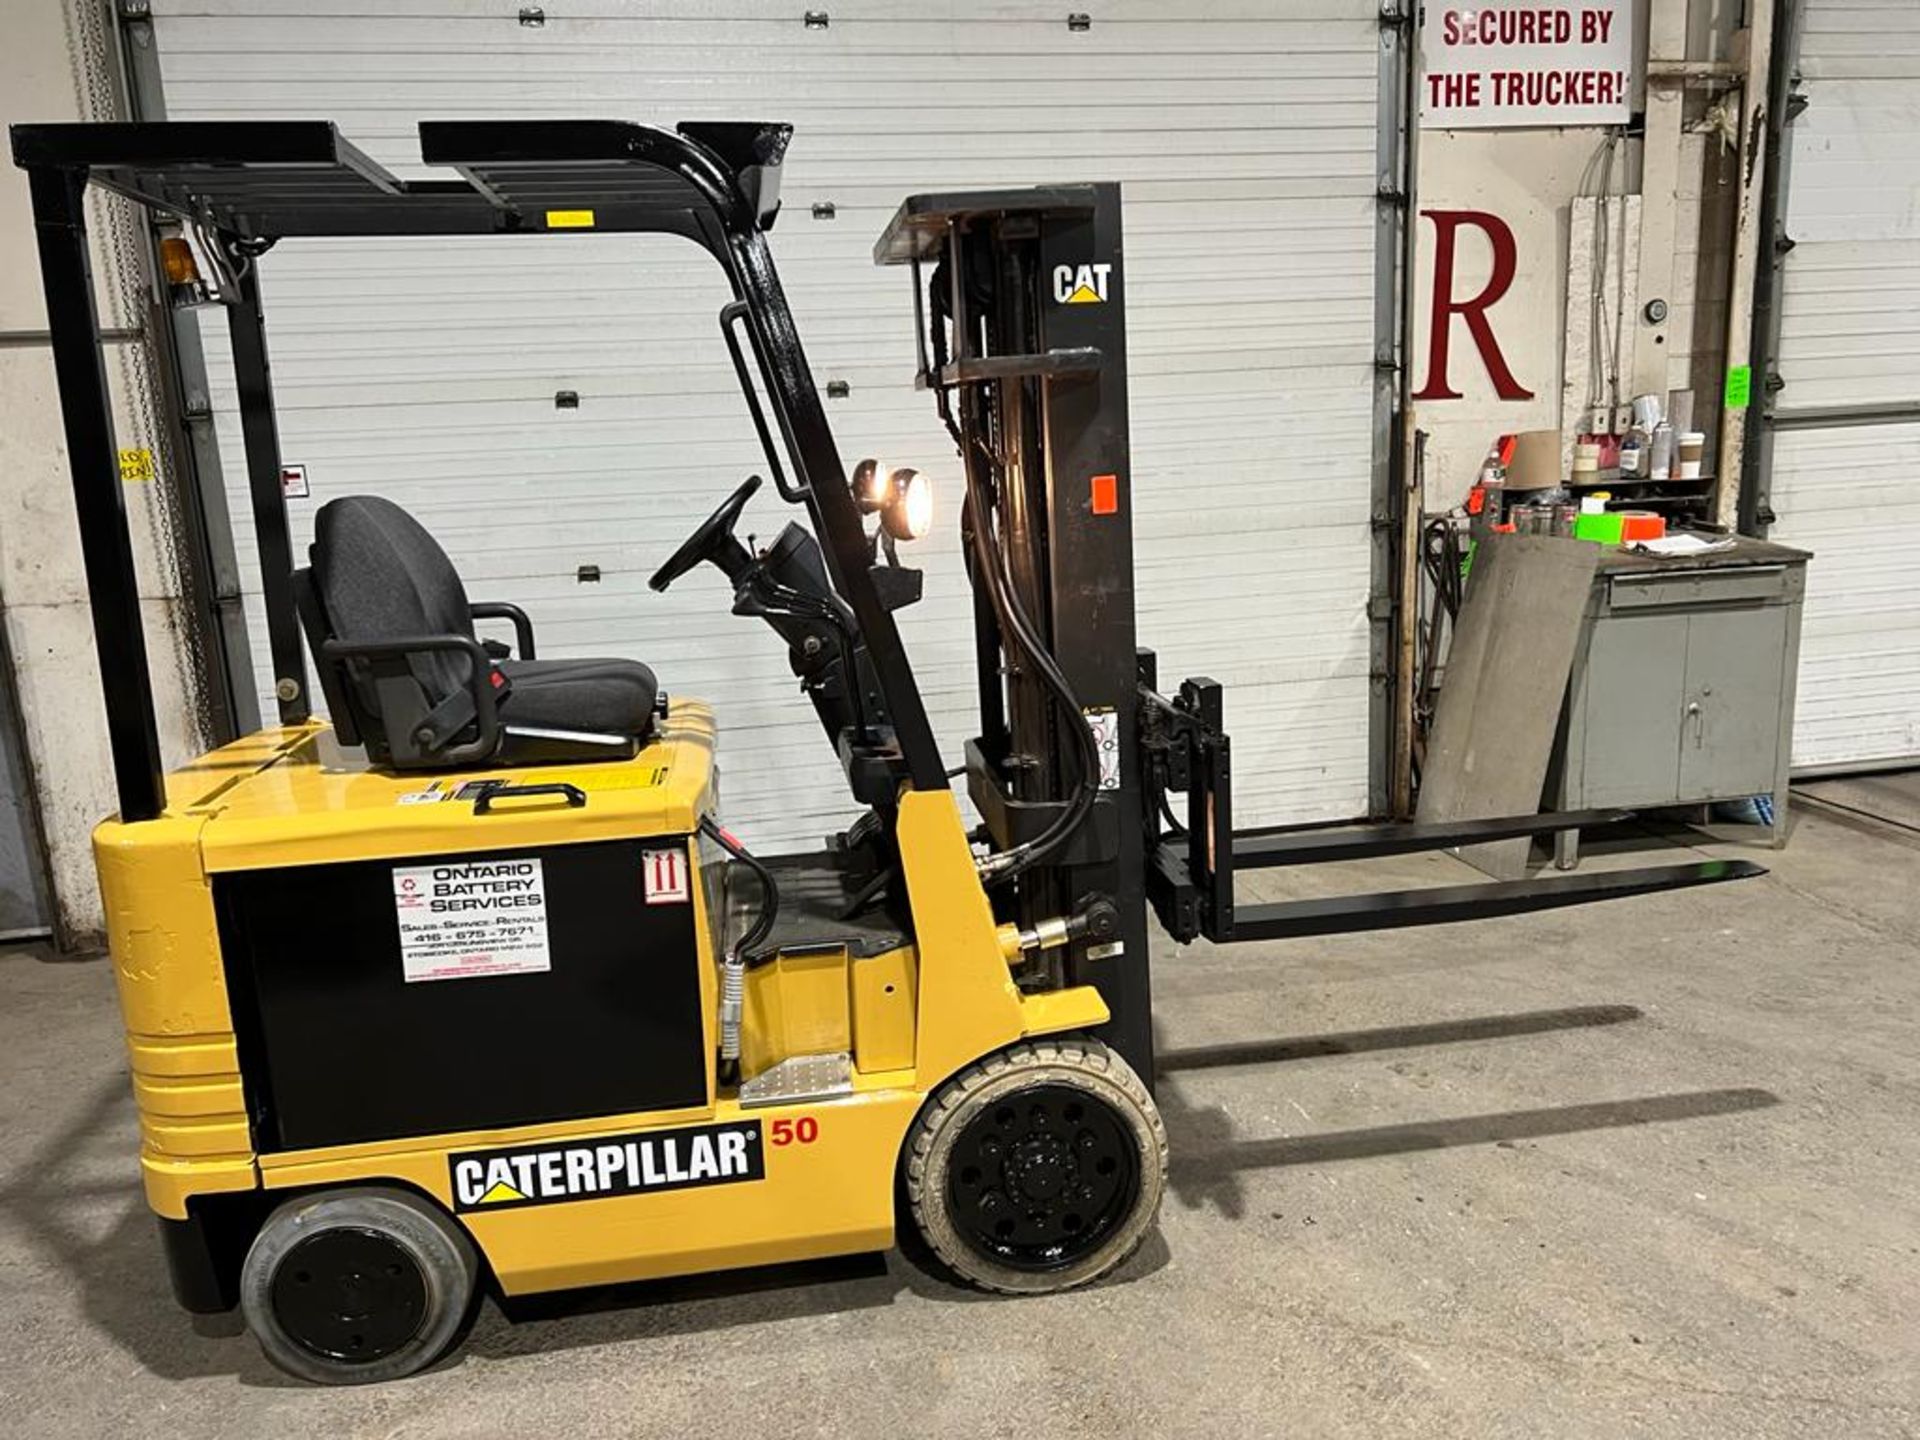 NICE CAT 5,000lbs Capacity Forklift Electric with Sideshift & 3-stage Mast 48V battery - FREE